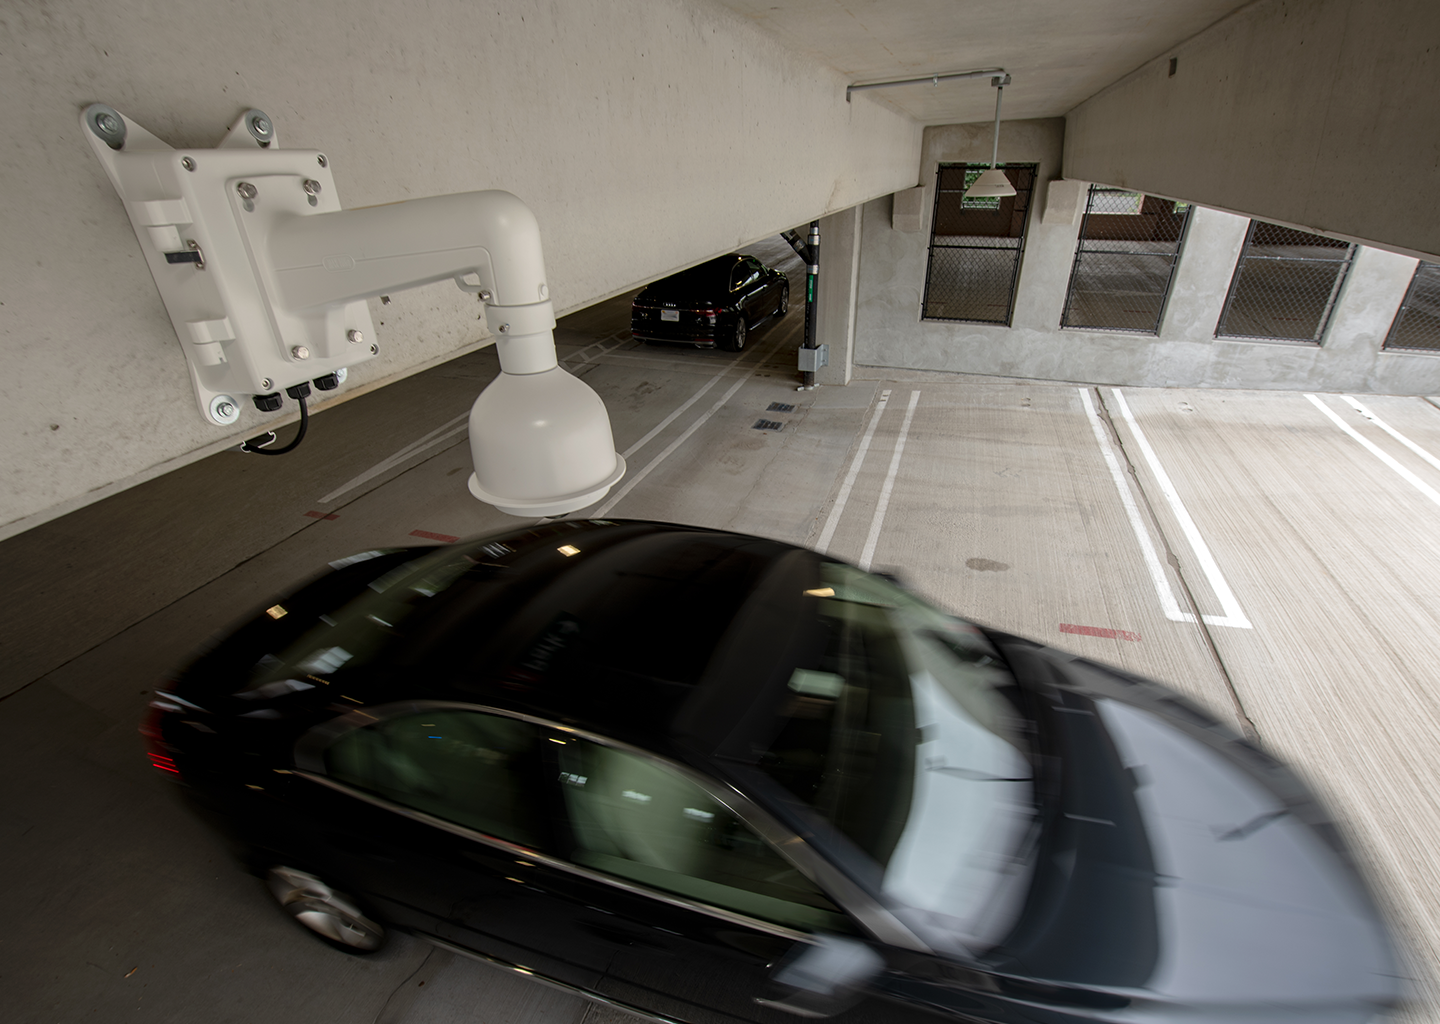 The camera based C5 smart counting solution detects vehicles entering and exiting your parking garage